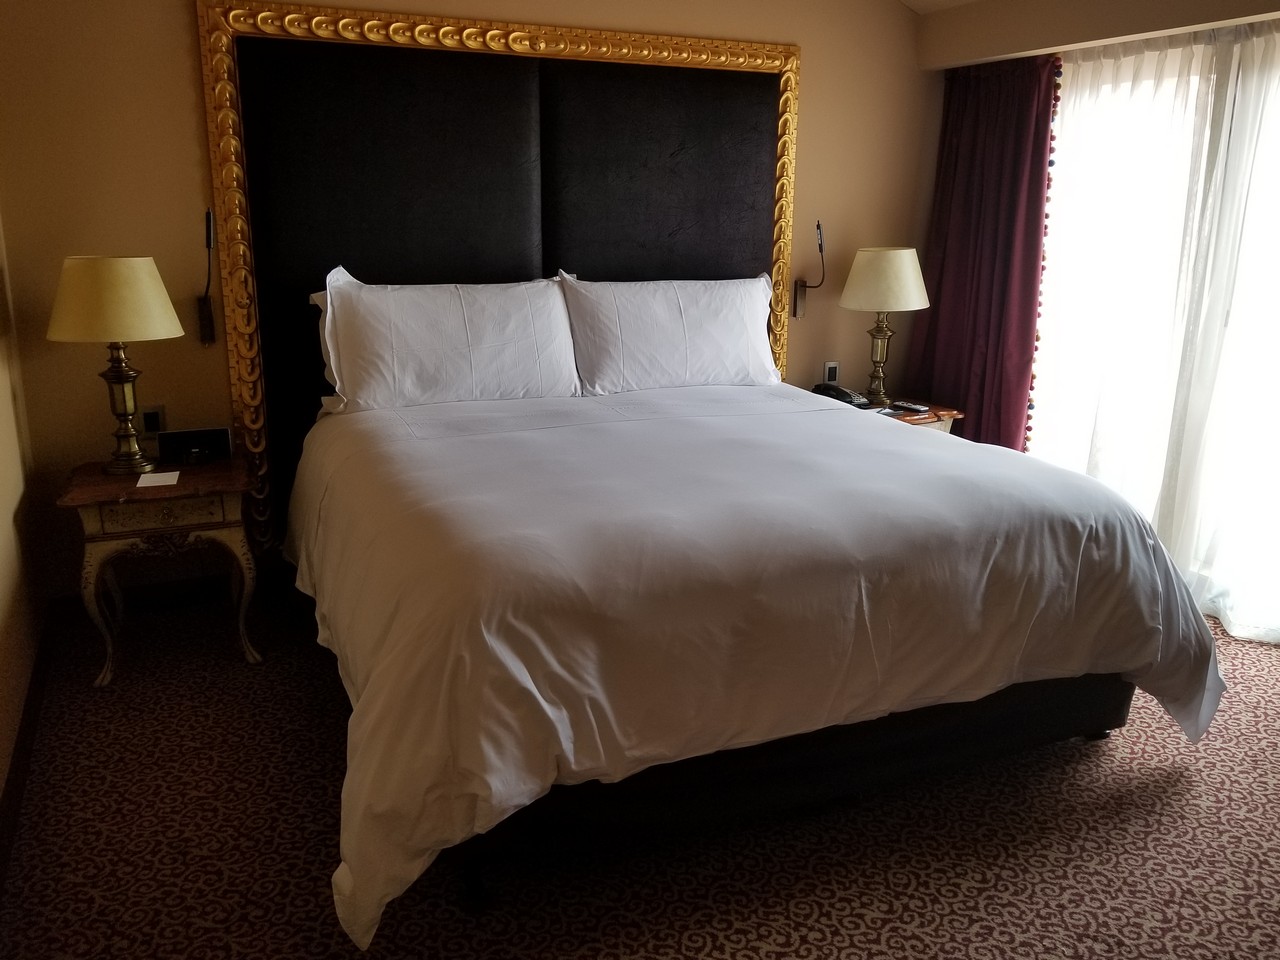 a bed with a gold frame